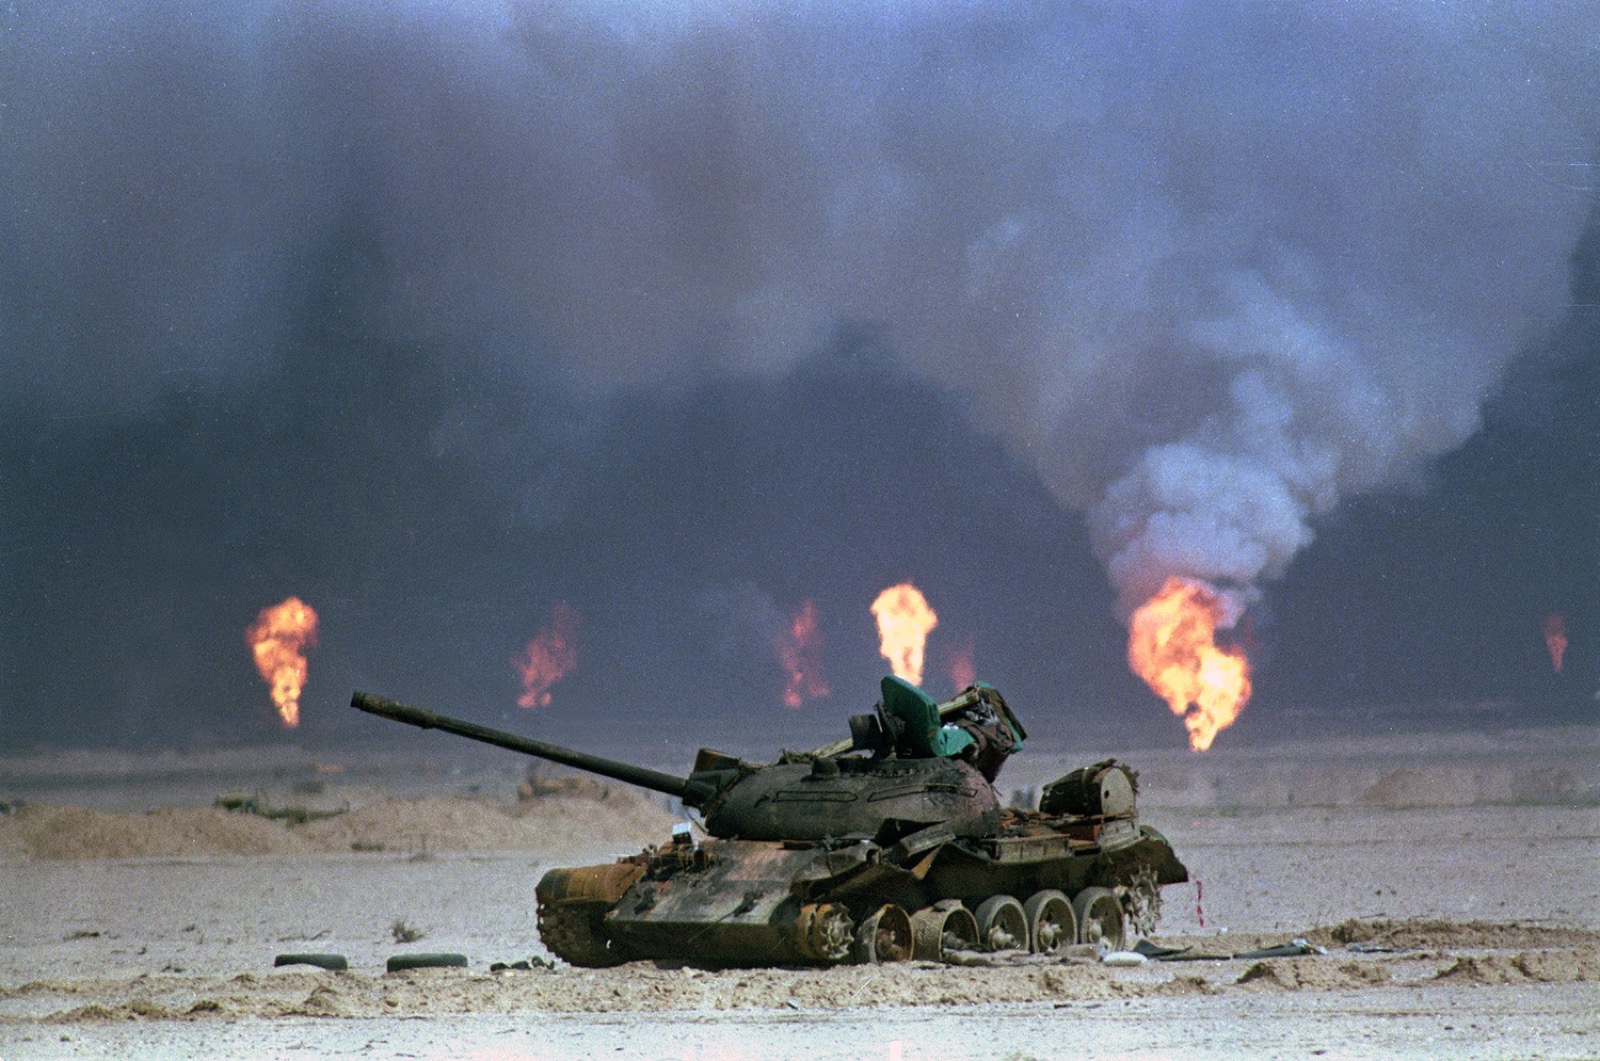 If You Can Pass This General Knowledge Test on Your First Try, You’re Undoubtedly Way Too Smart GULF WAR IRAQI TANK